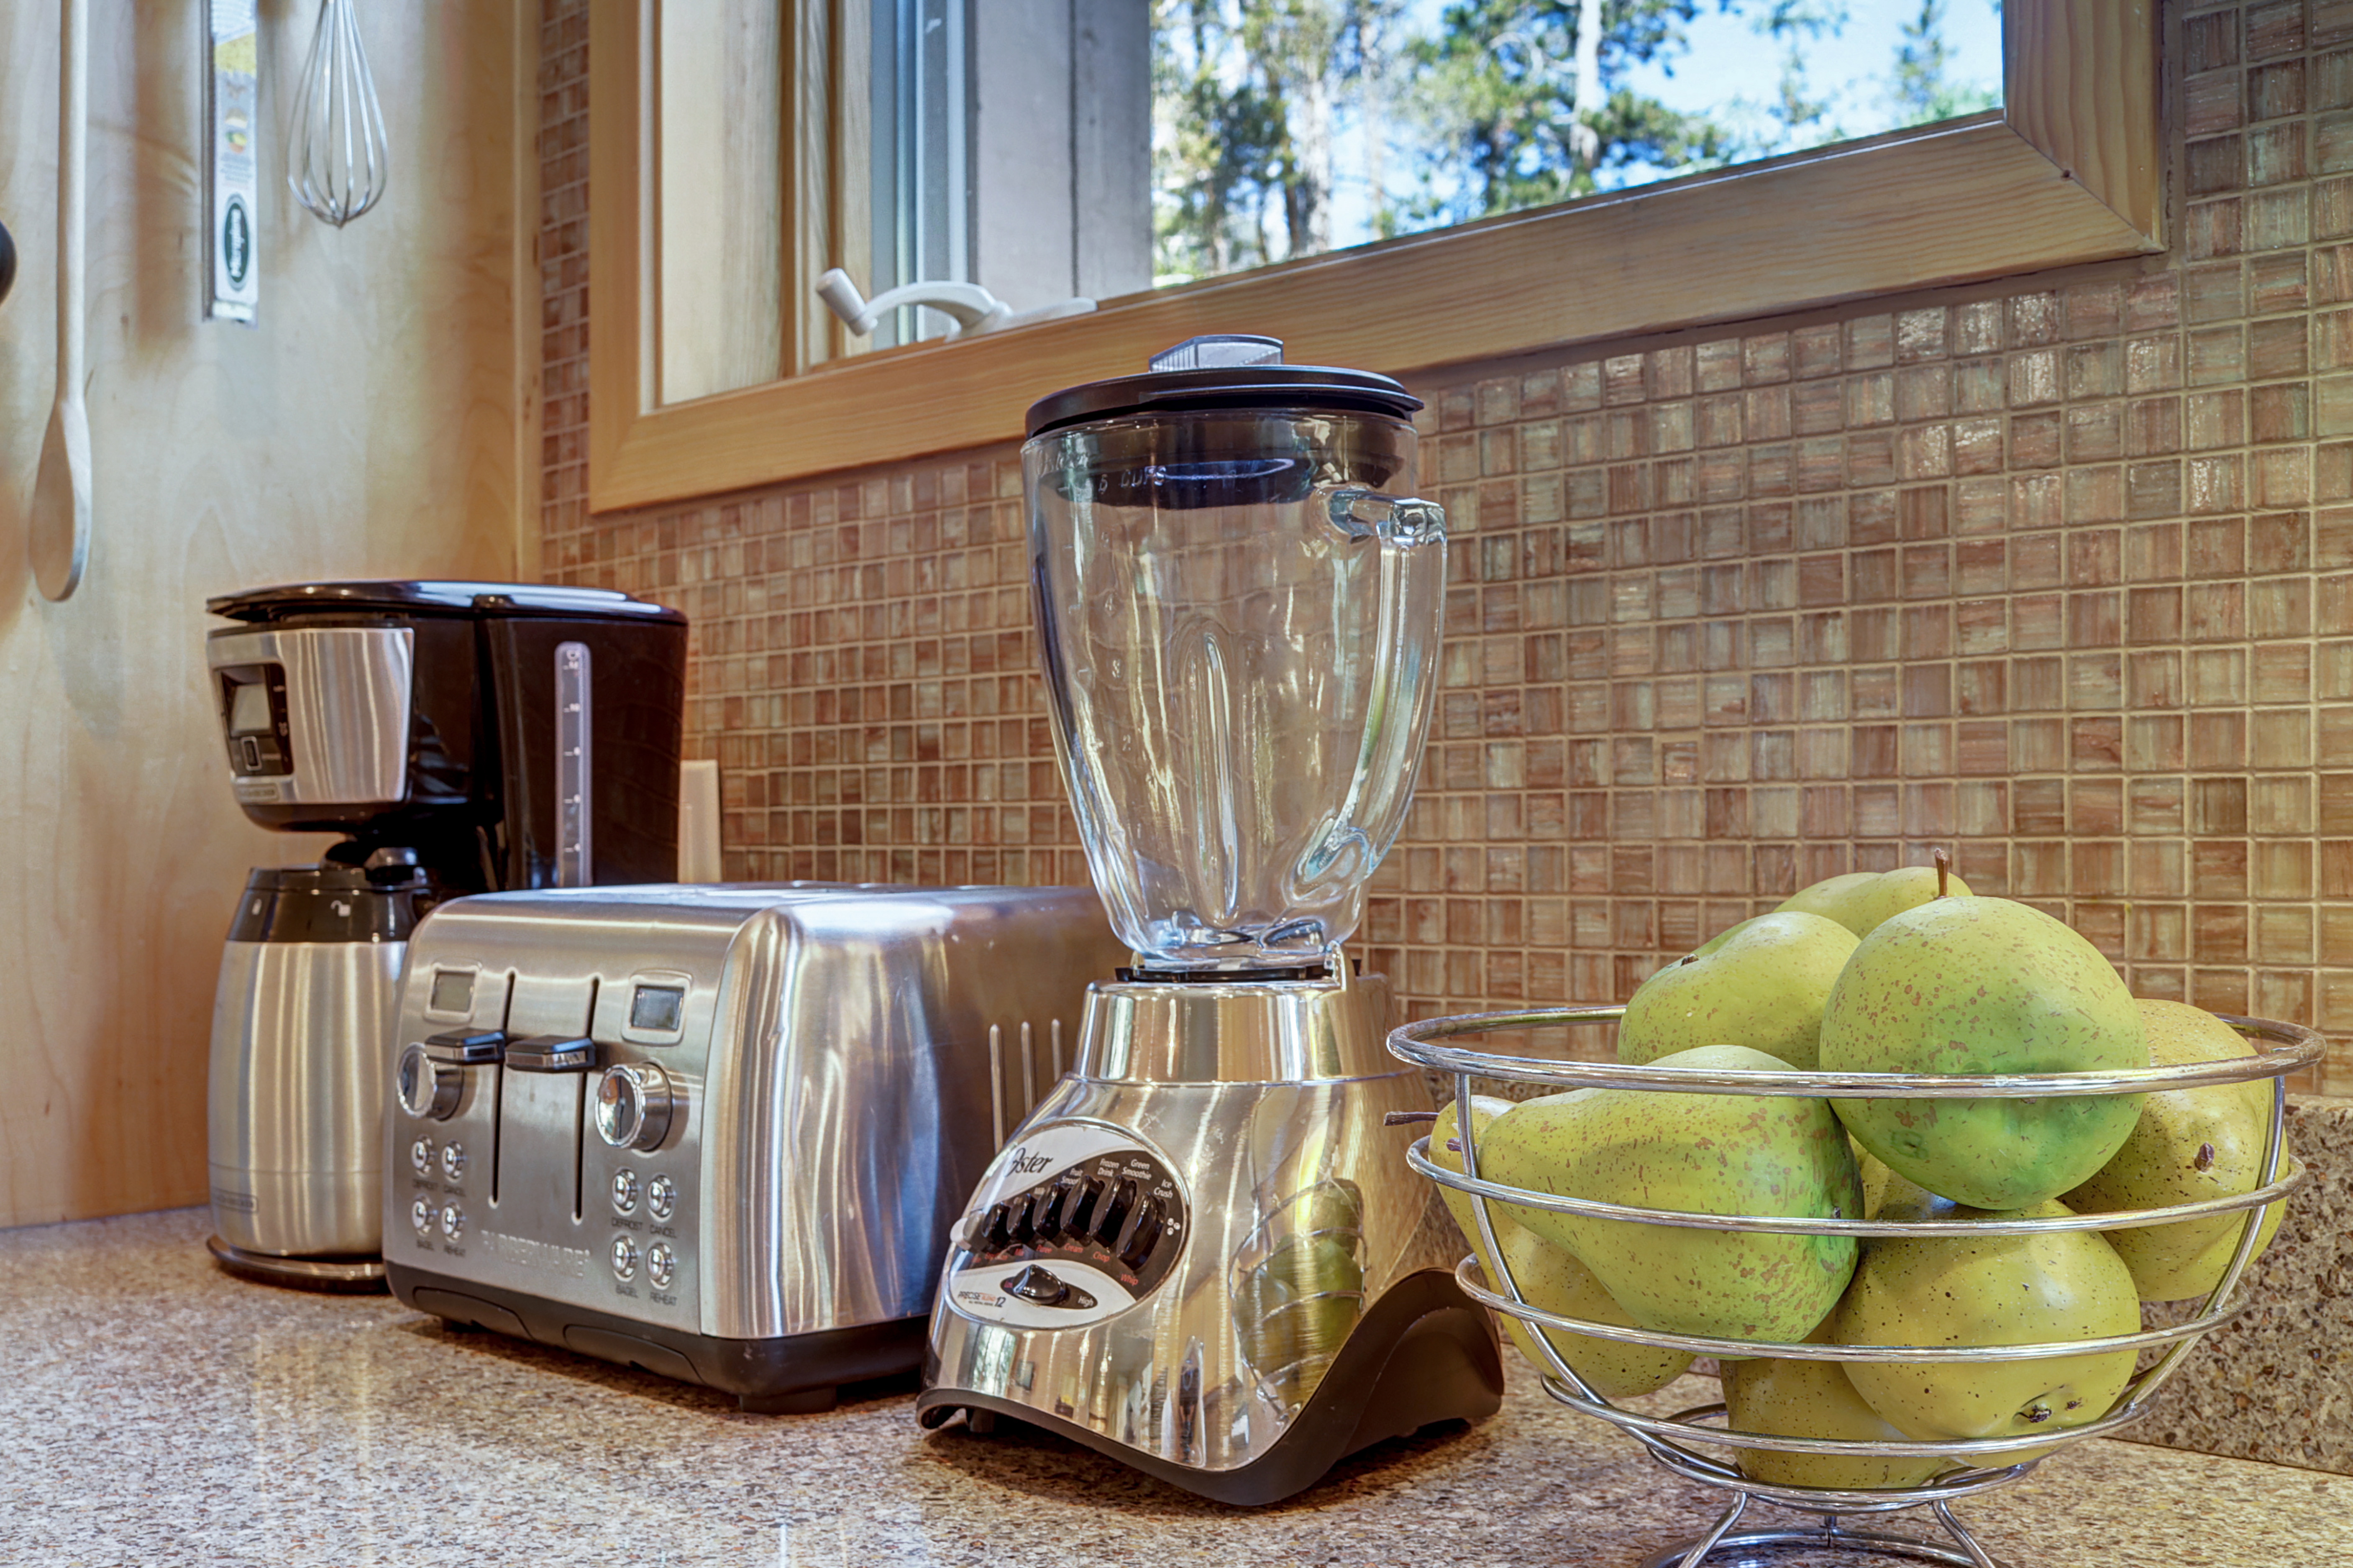 12 cup coffee maker, toaster, slow cooker and blender available in the kitchen. - Buffalo Mountain Vista Frisco Vacation Rental